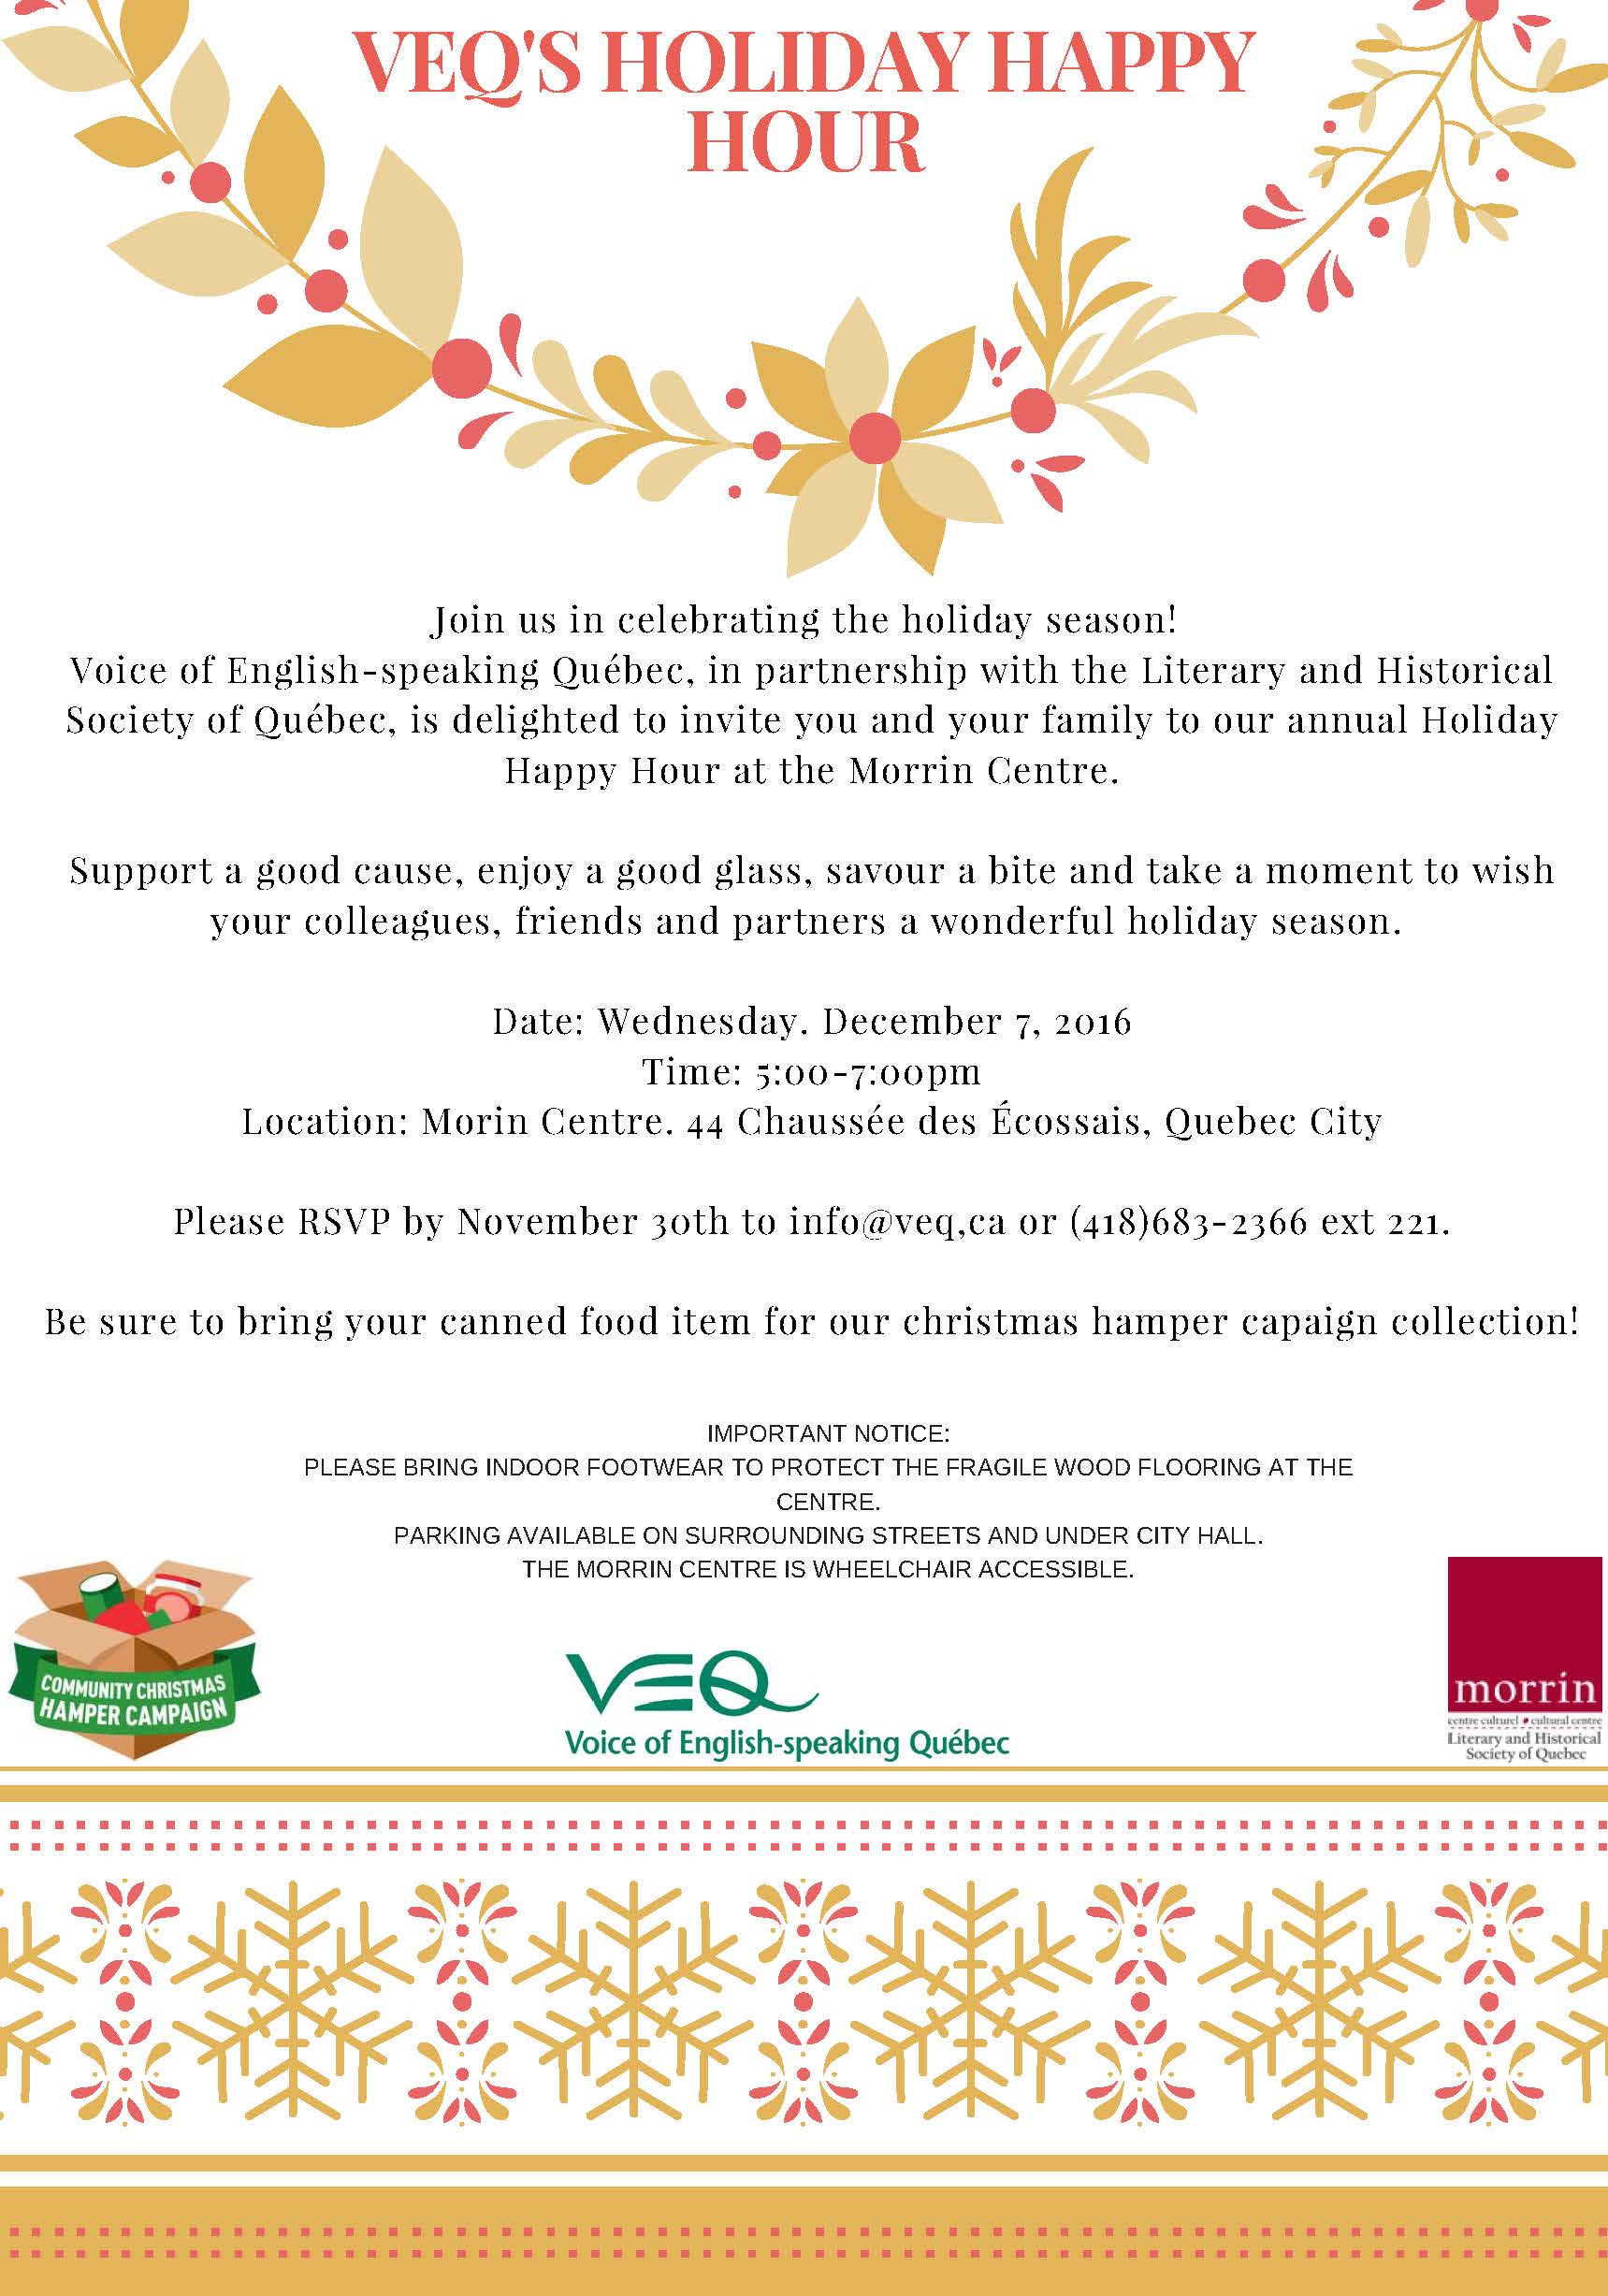 CALLING VOLUNTEERS FOR VEQ’S HOLIDAY HAPPY HOUR @ Morrin Centre